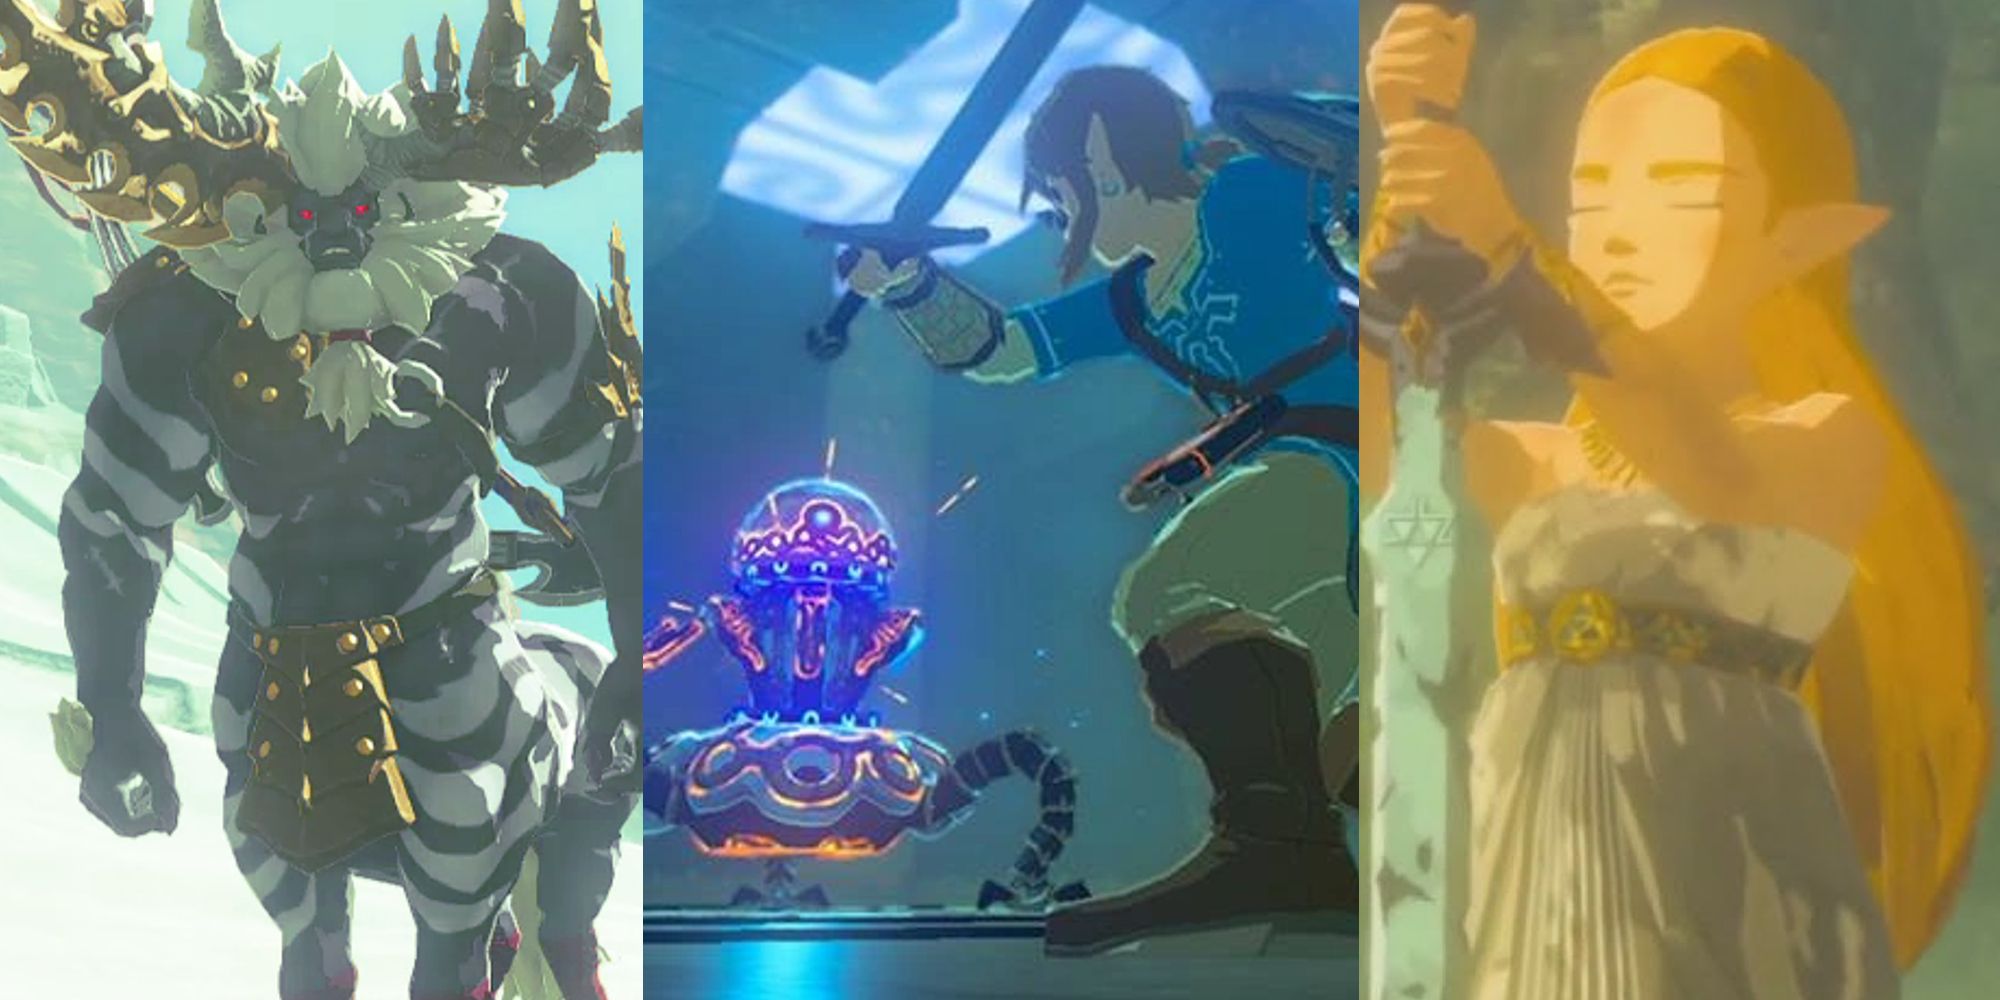 White-haired Lynel in the snow; Link fighting a Guardian Scout; Zelda holding the Master Sword